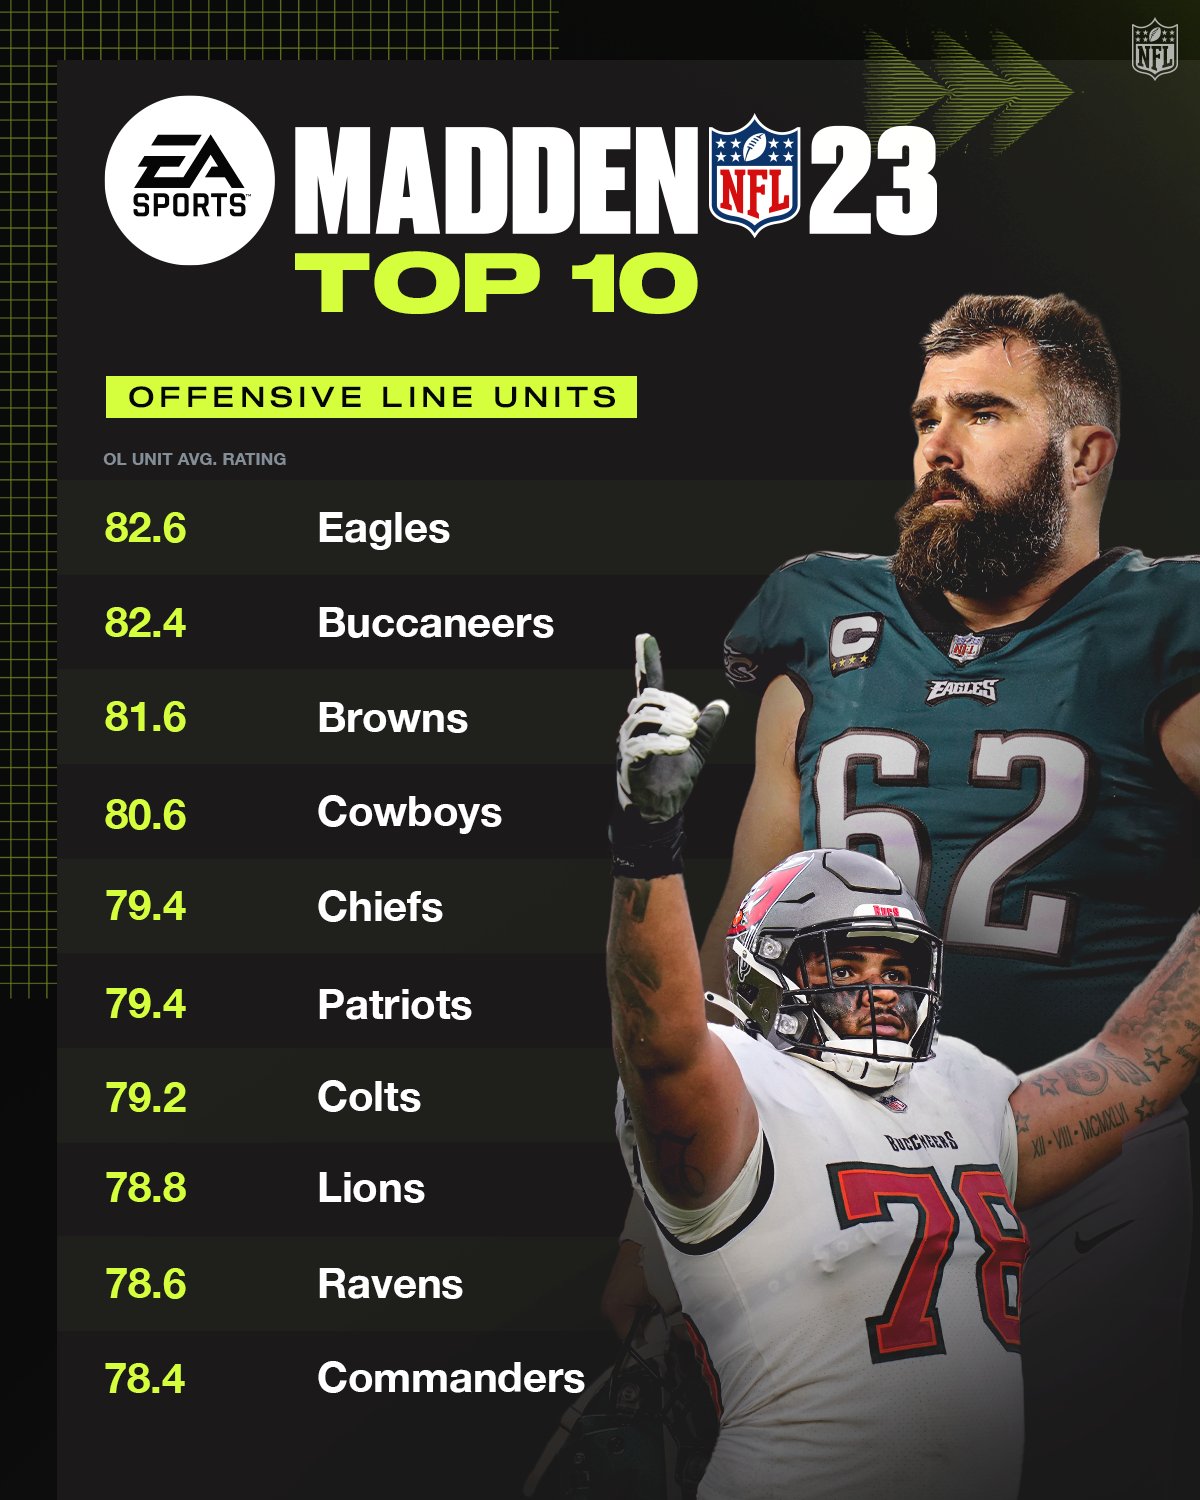 NFL on Twitter "Pick these teams in EAMaddenNFL if you want the best